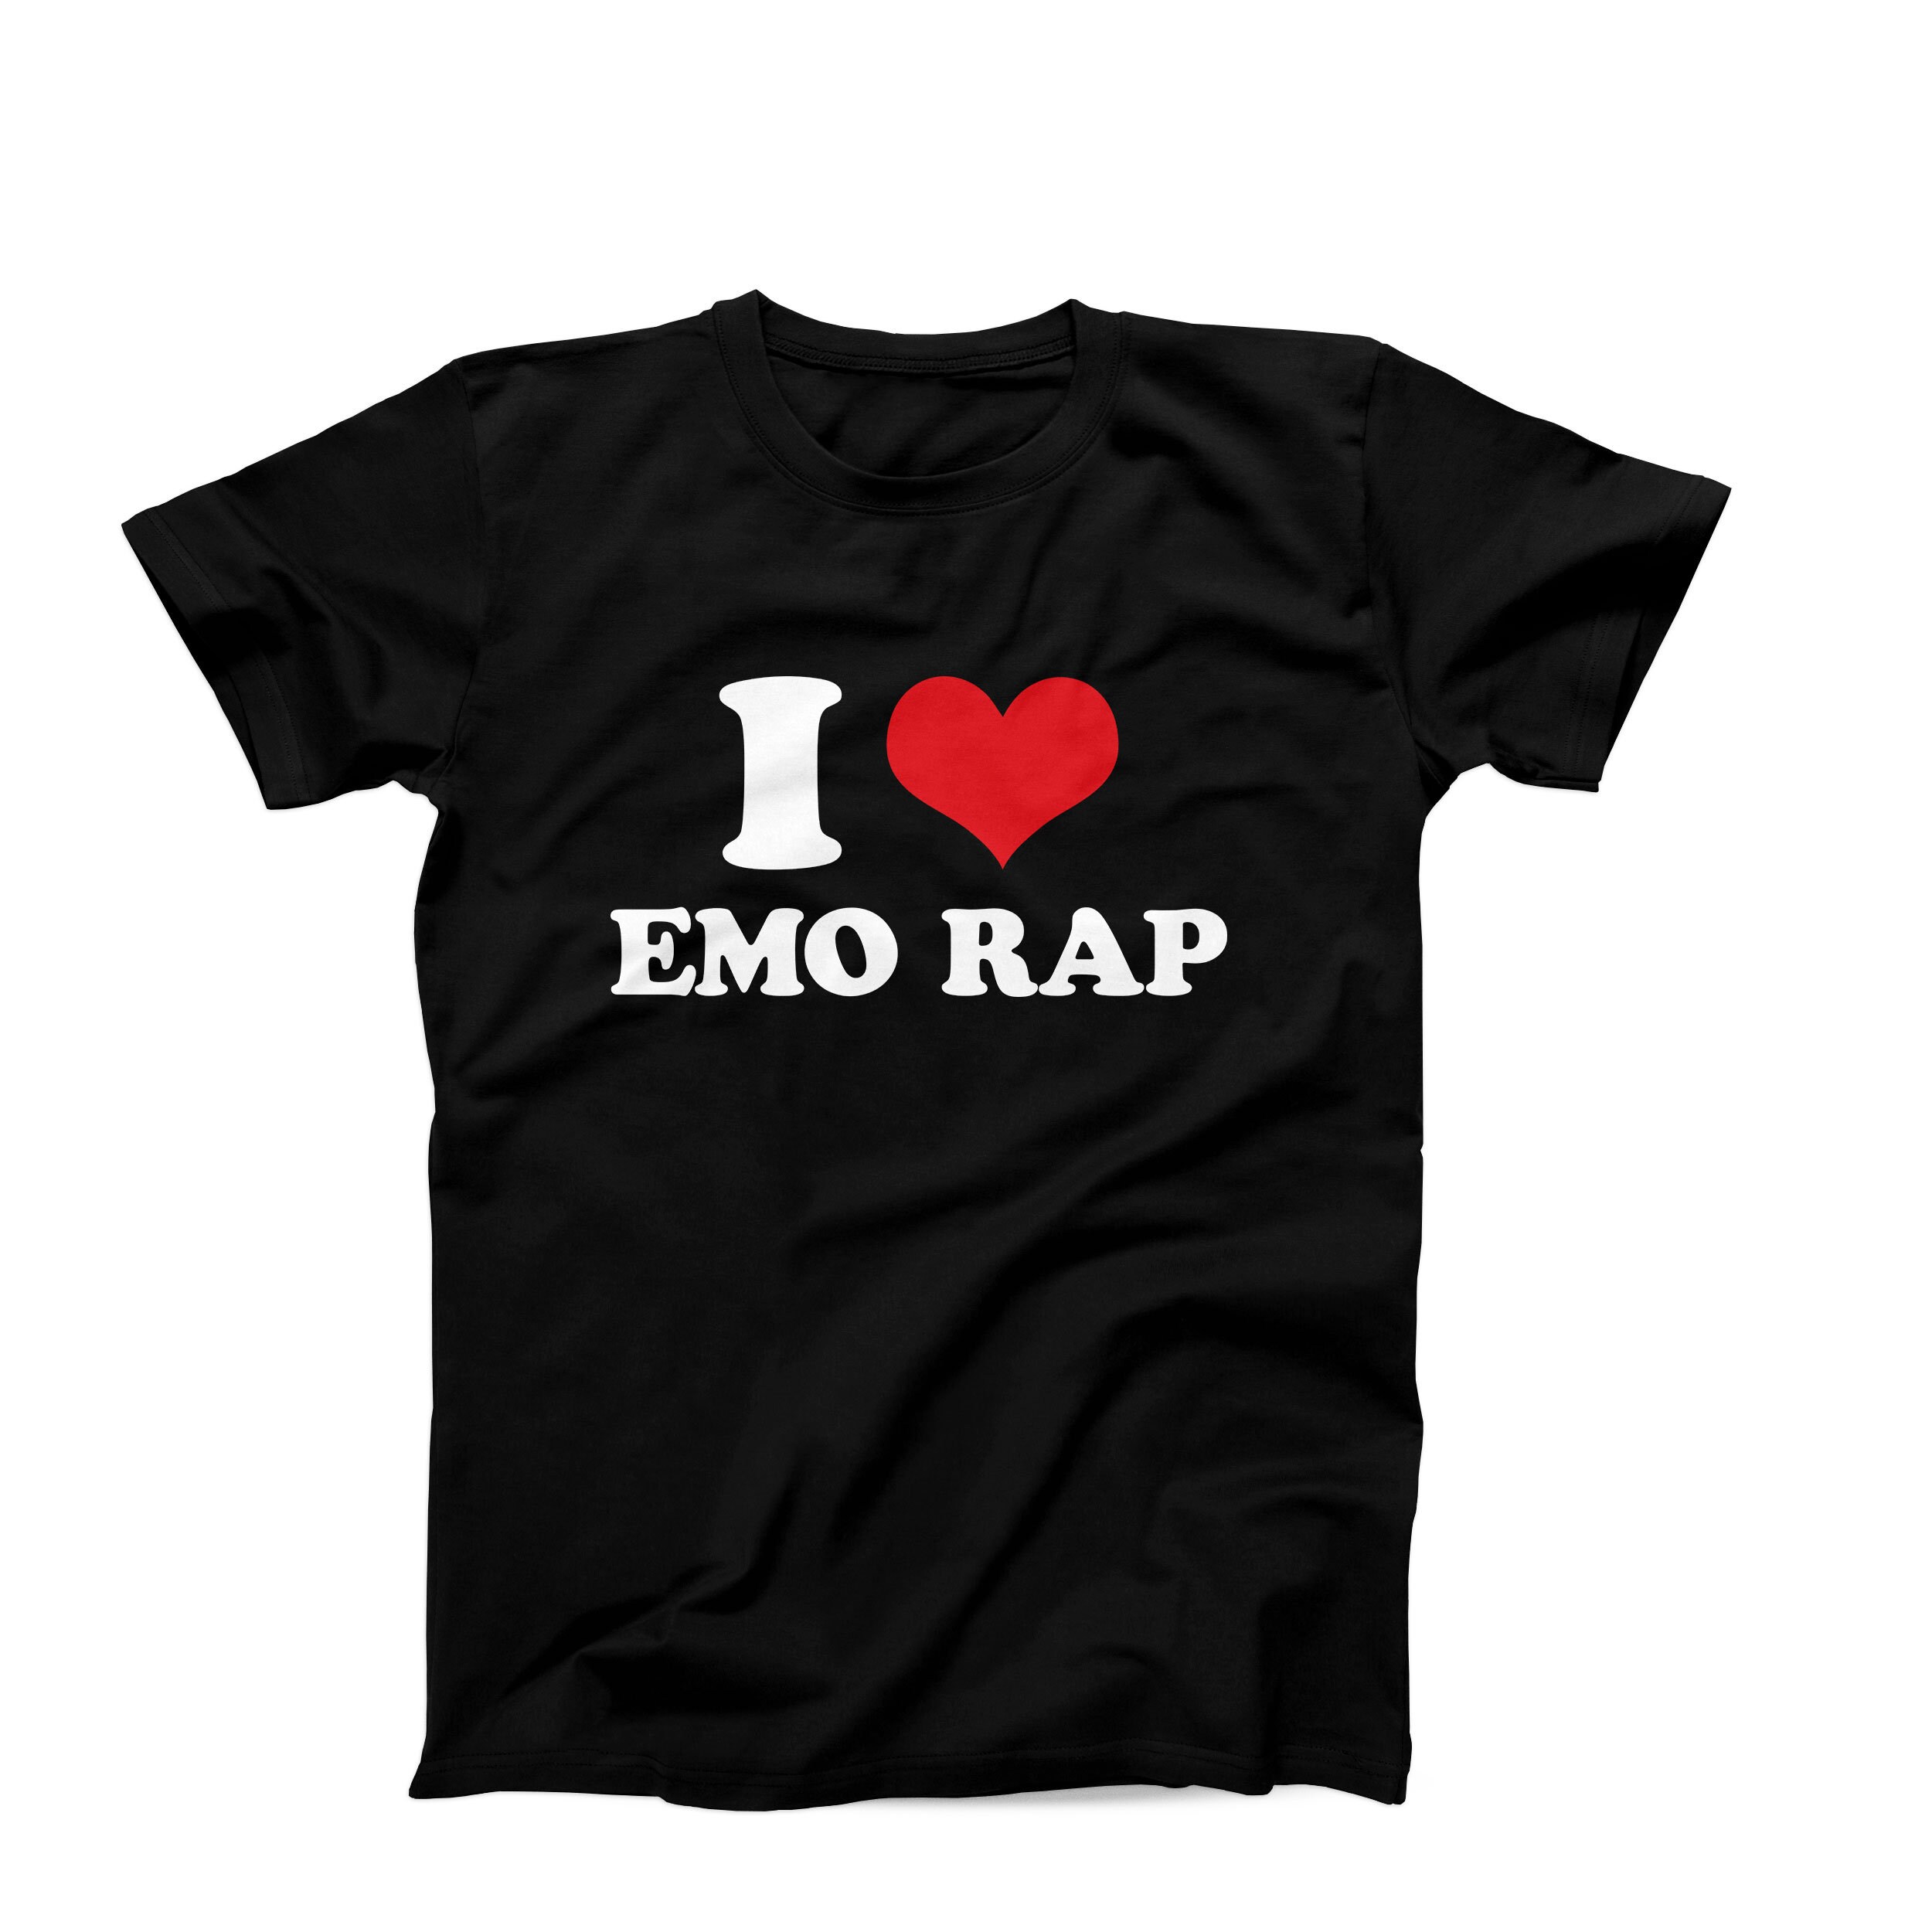 Best Emo Hip-Hop and Sad Trap Rap Songs of the Last Five Years - XXL